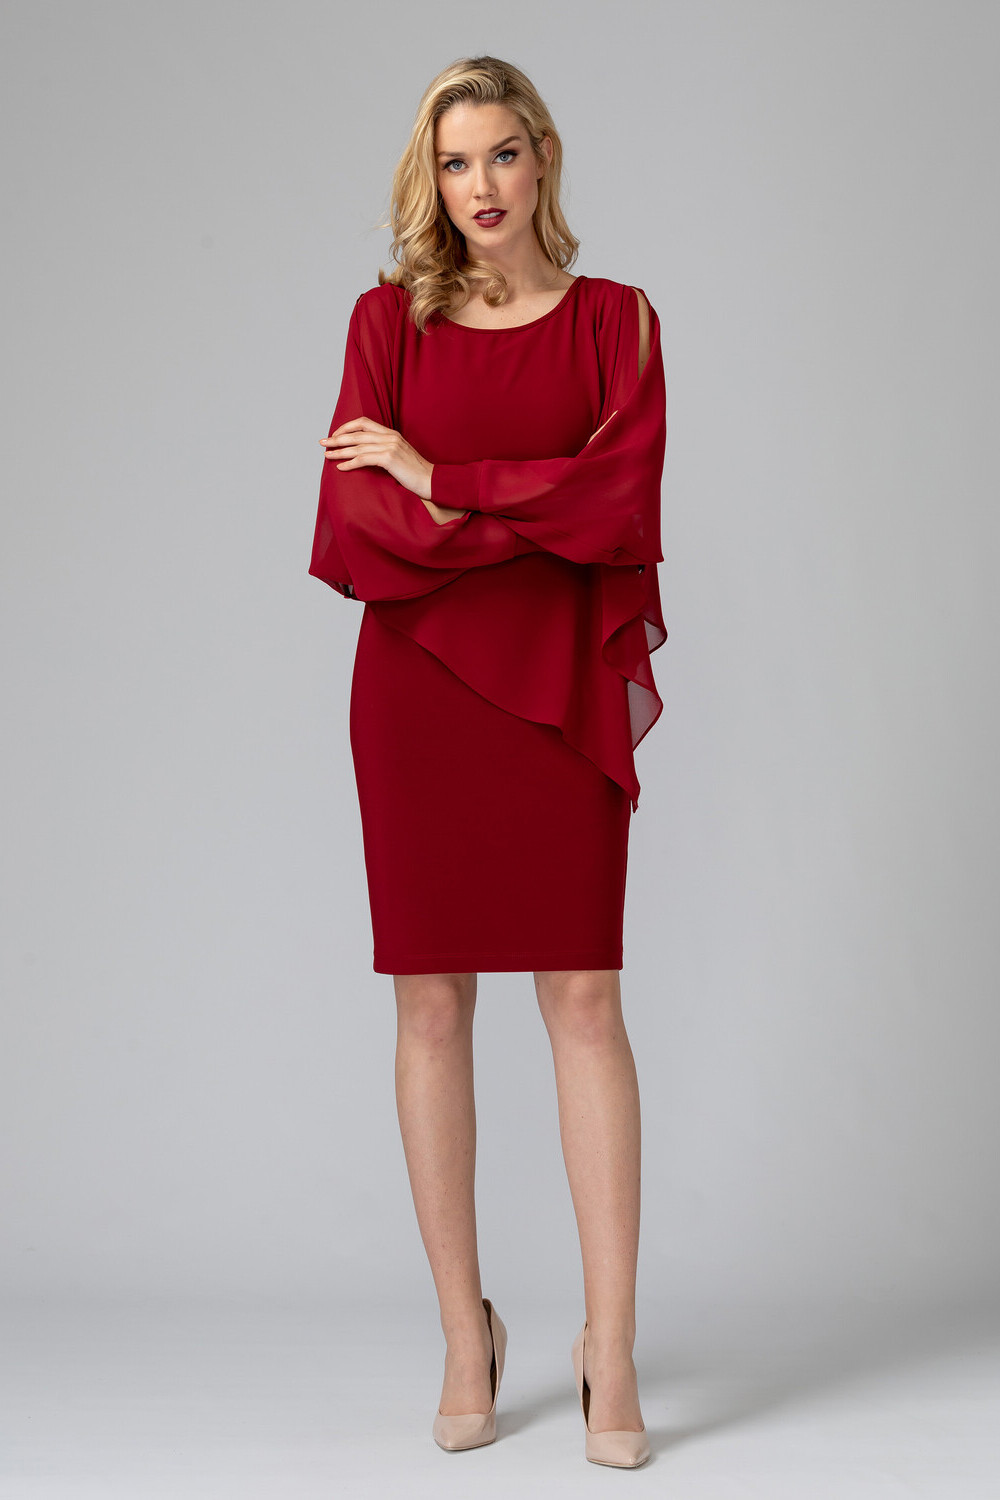 Joseph Ribkoff dress style 193205. Imperial Red 193